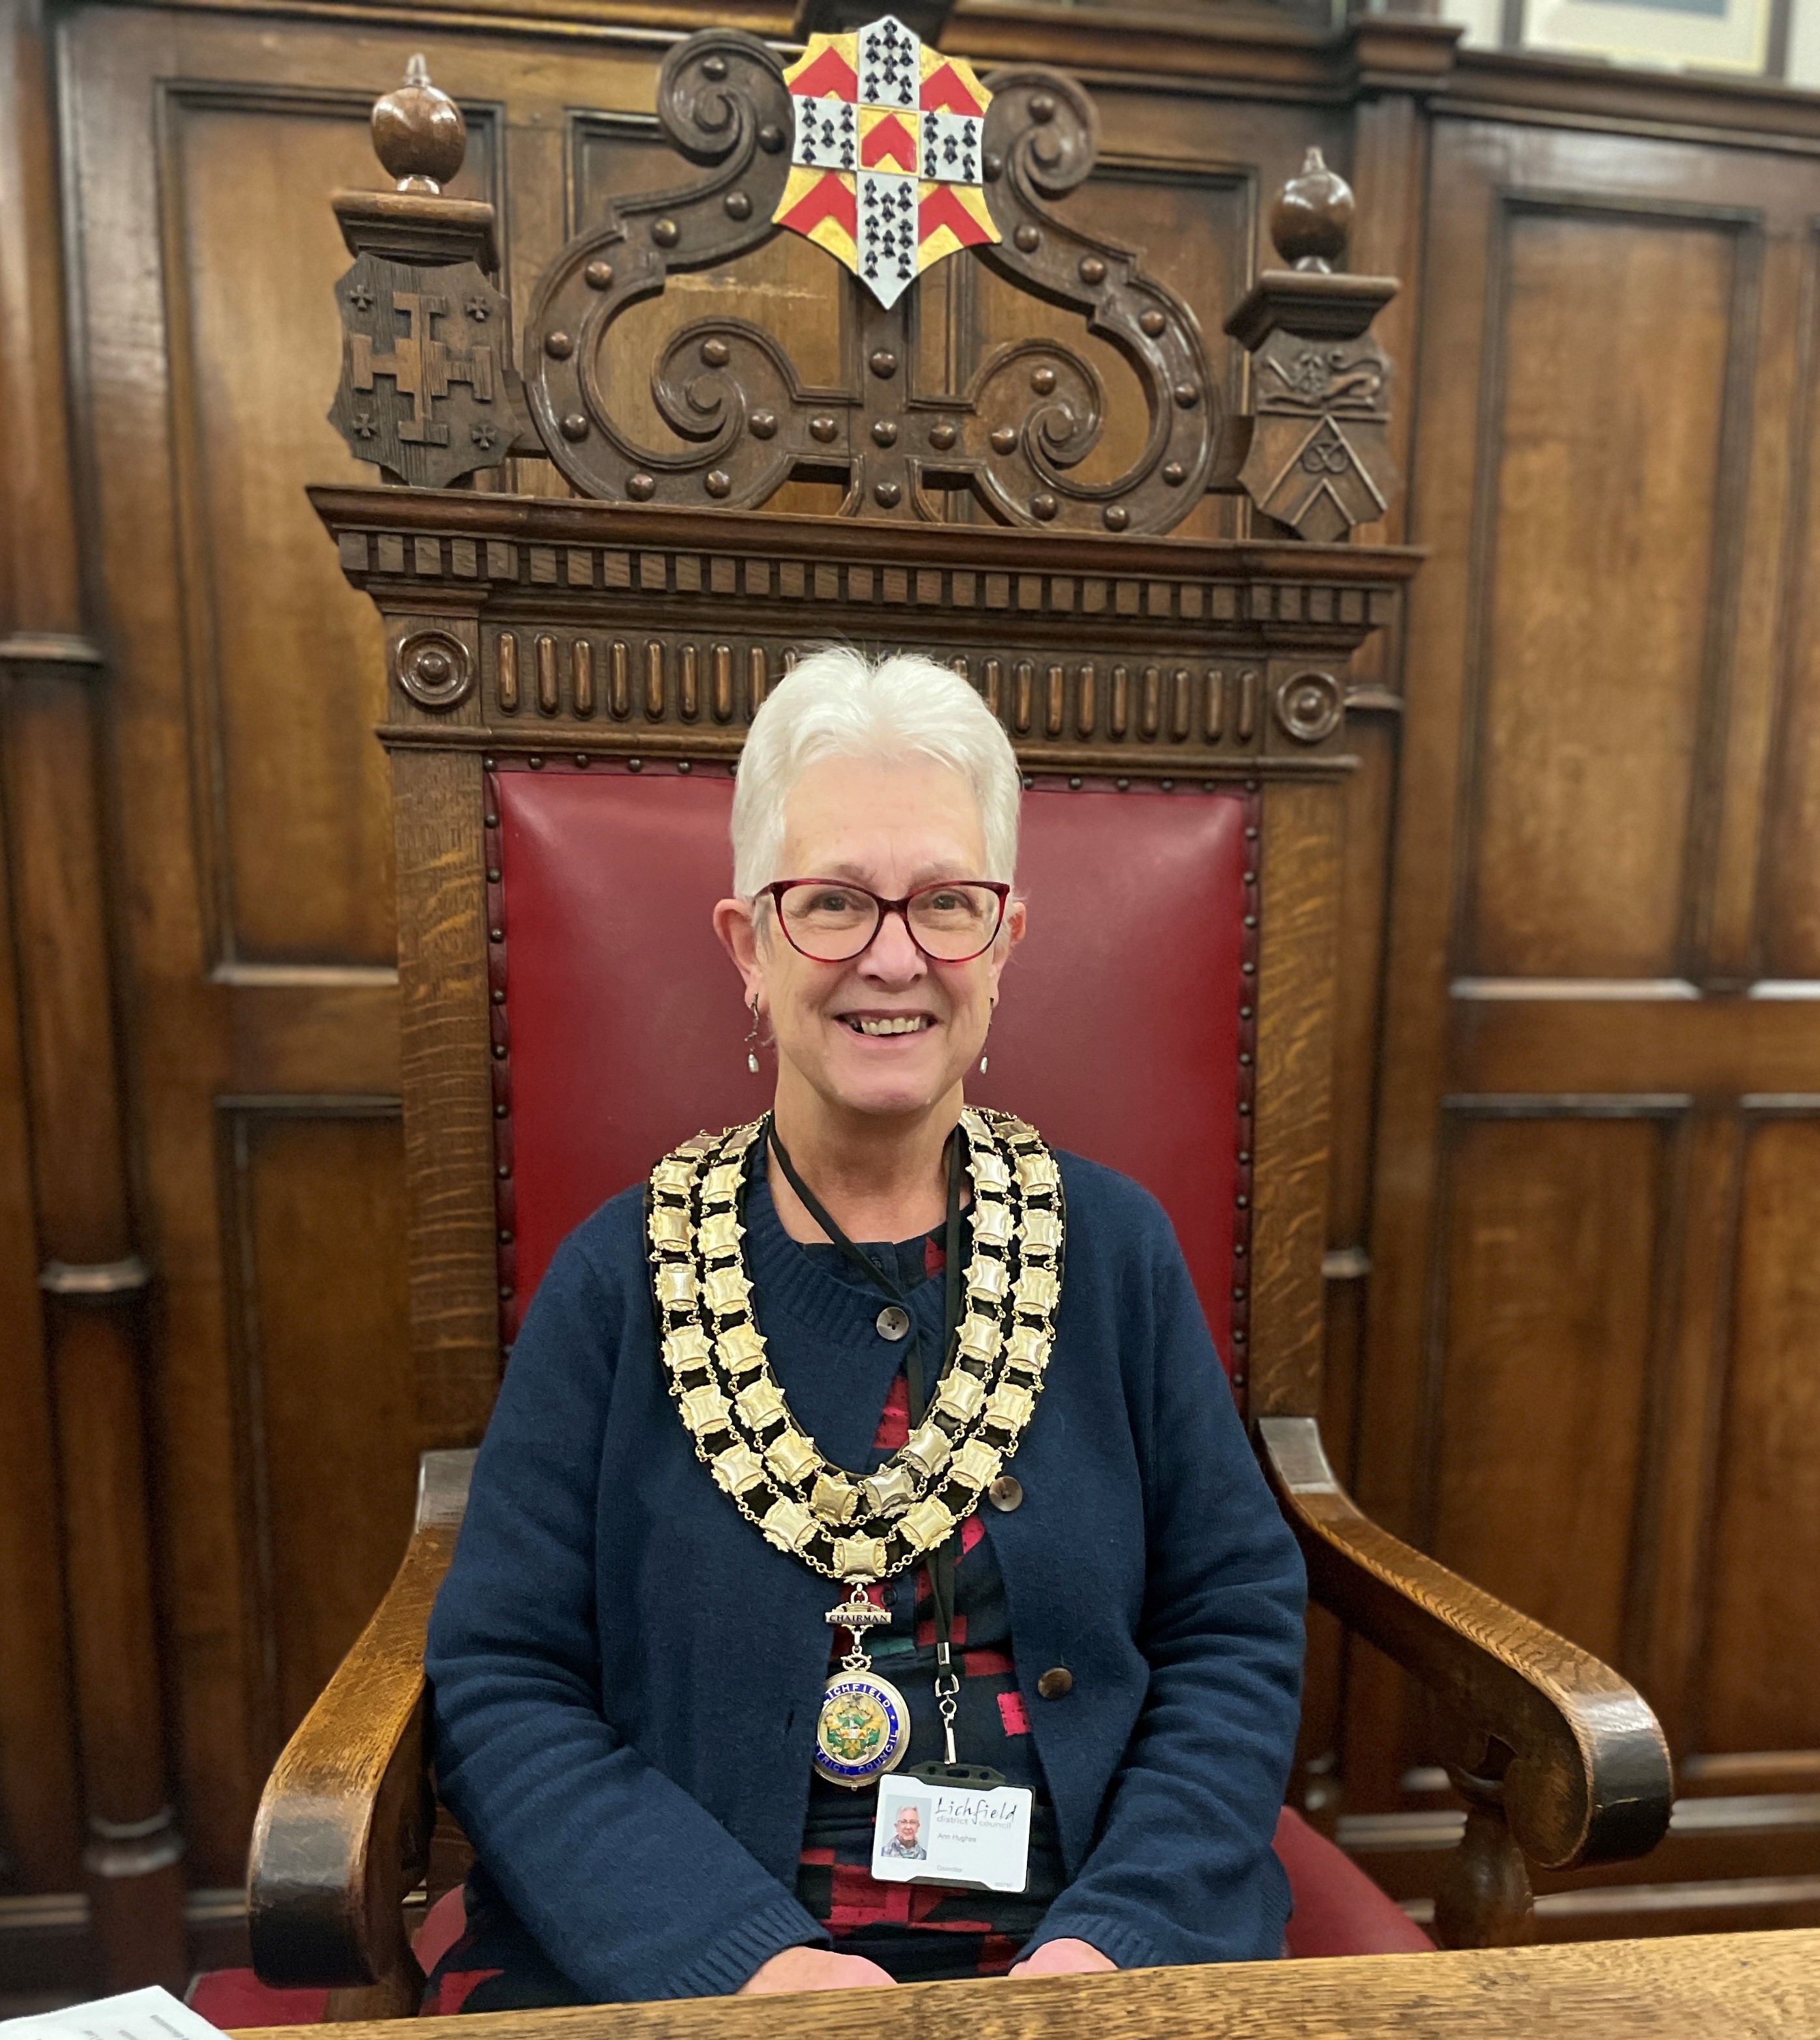 A picture of the new Chair of Lichfield District Council Councillor Ann Hughes.